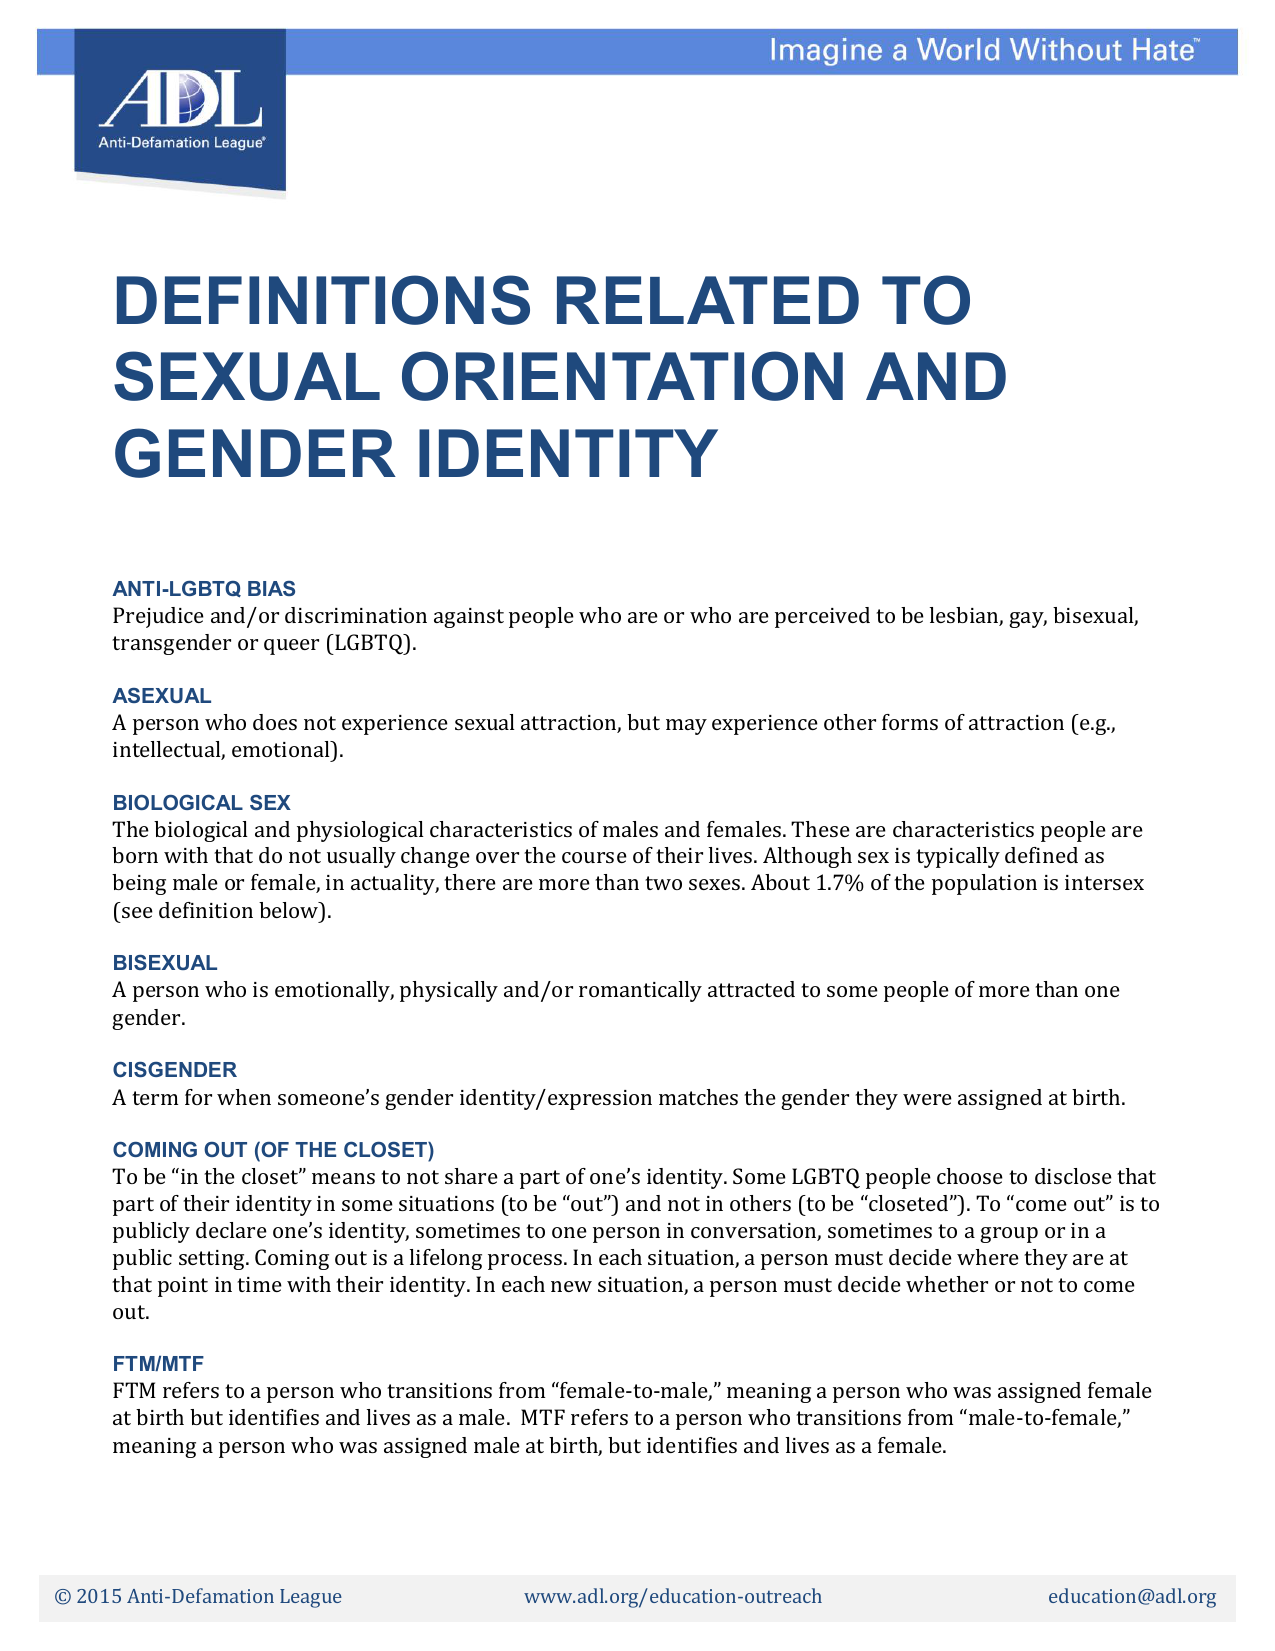 definitions related to sexual orientation and gender identity